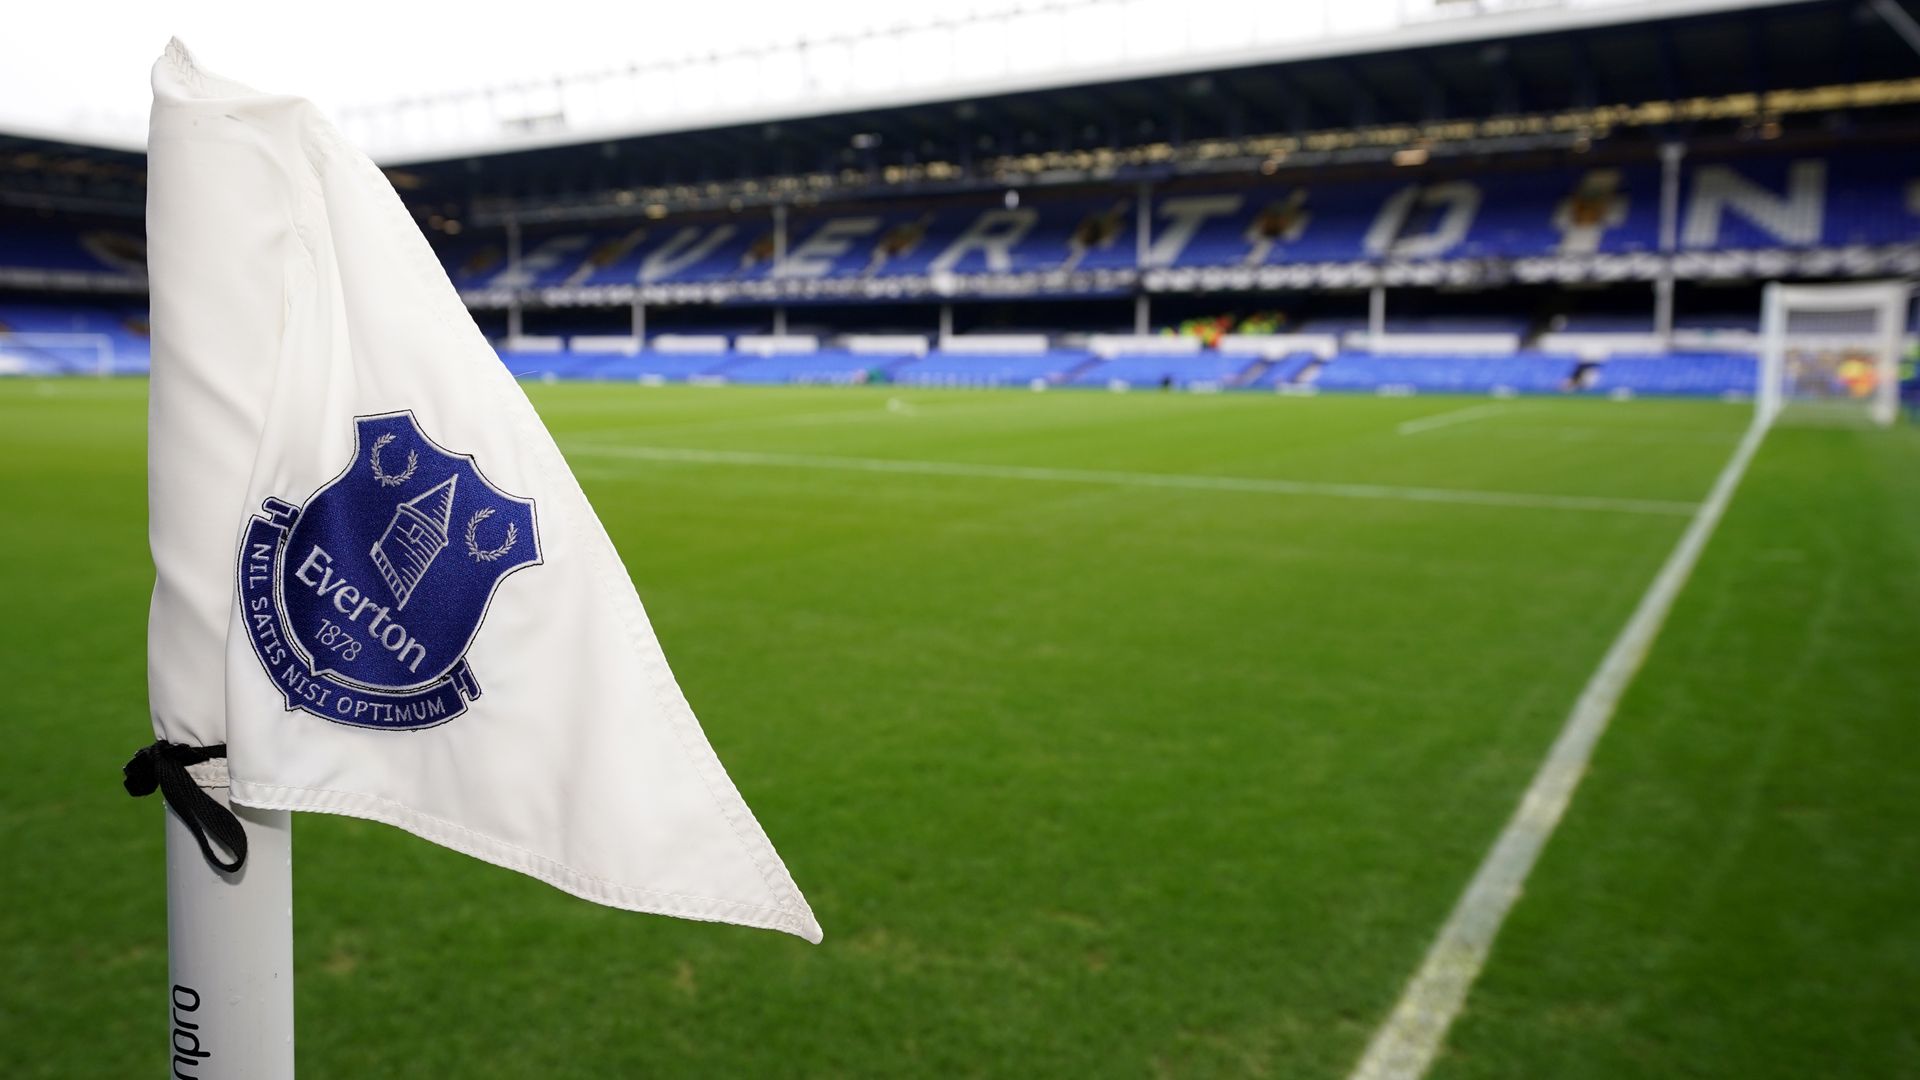 Proposed new Everton owners 777 Partners set to meet Premier League